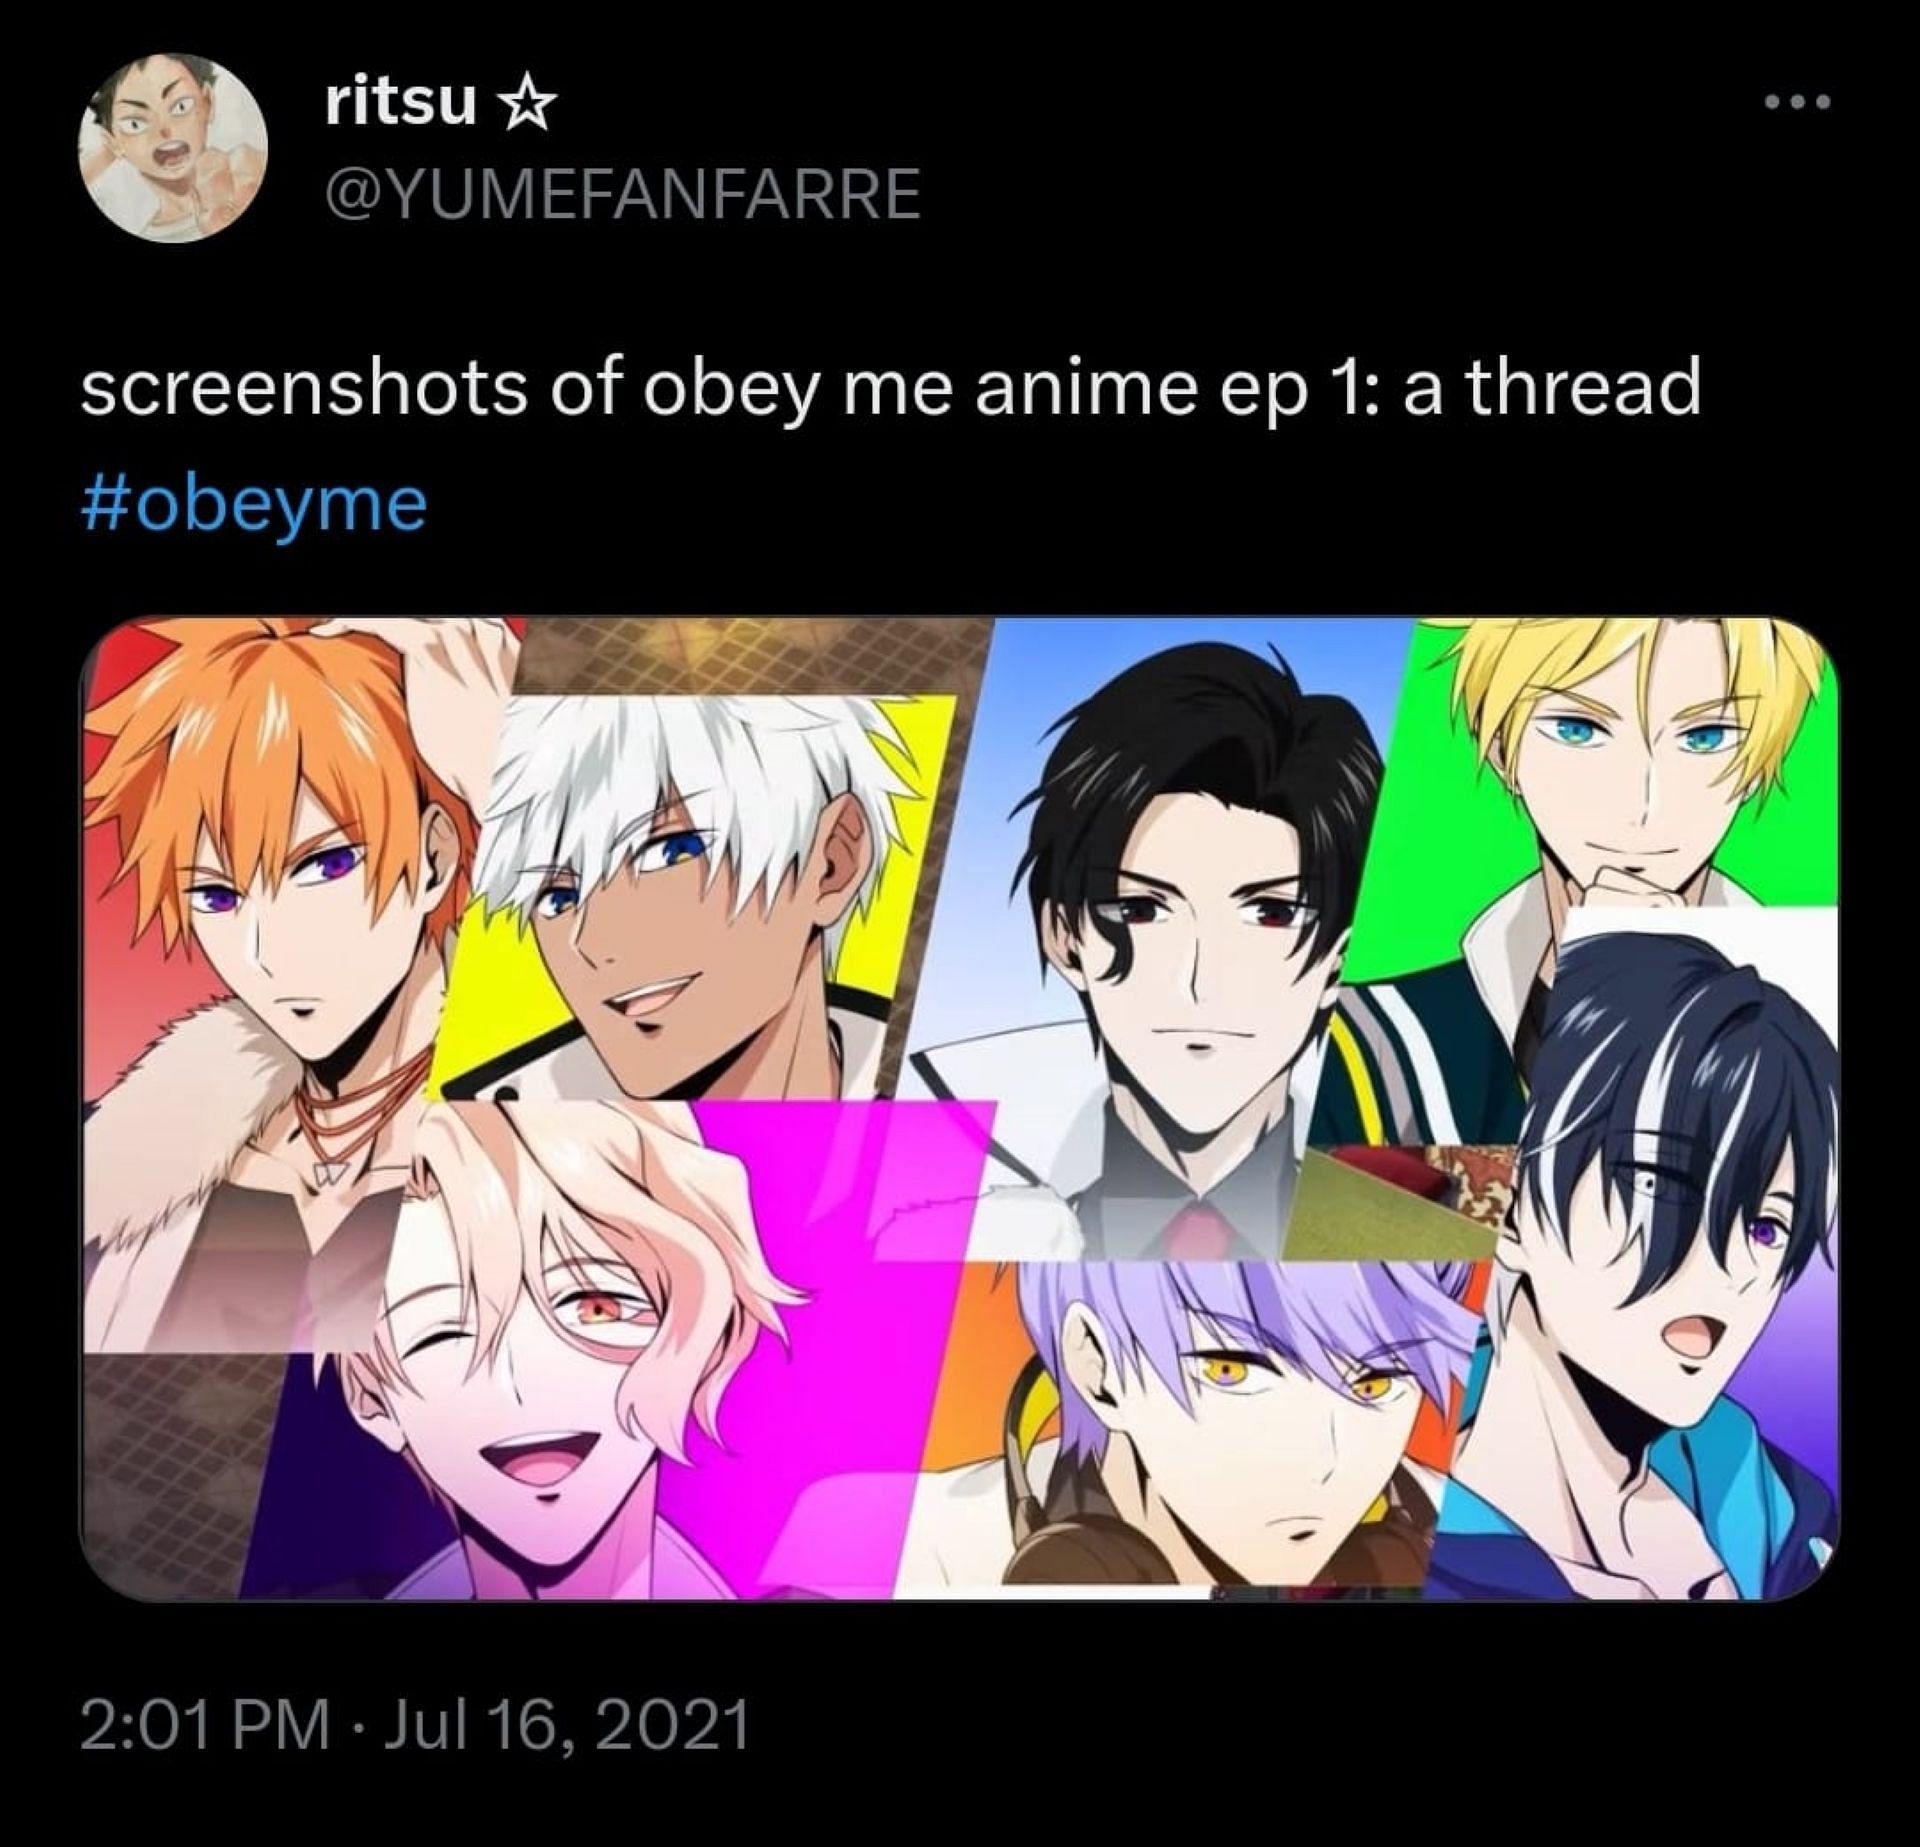 Obey Me! Anime Season Two is Launching This July